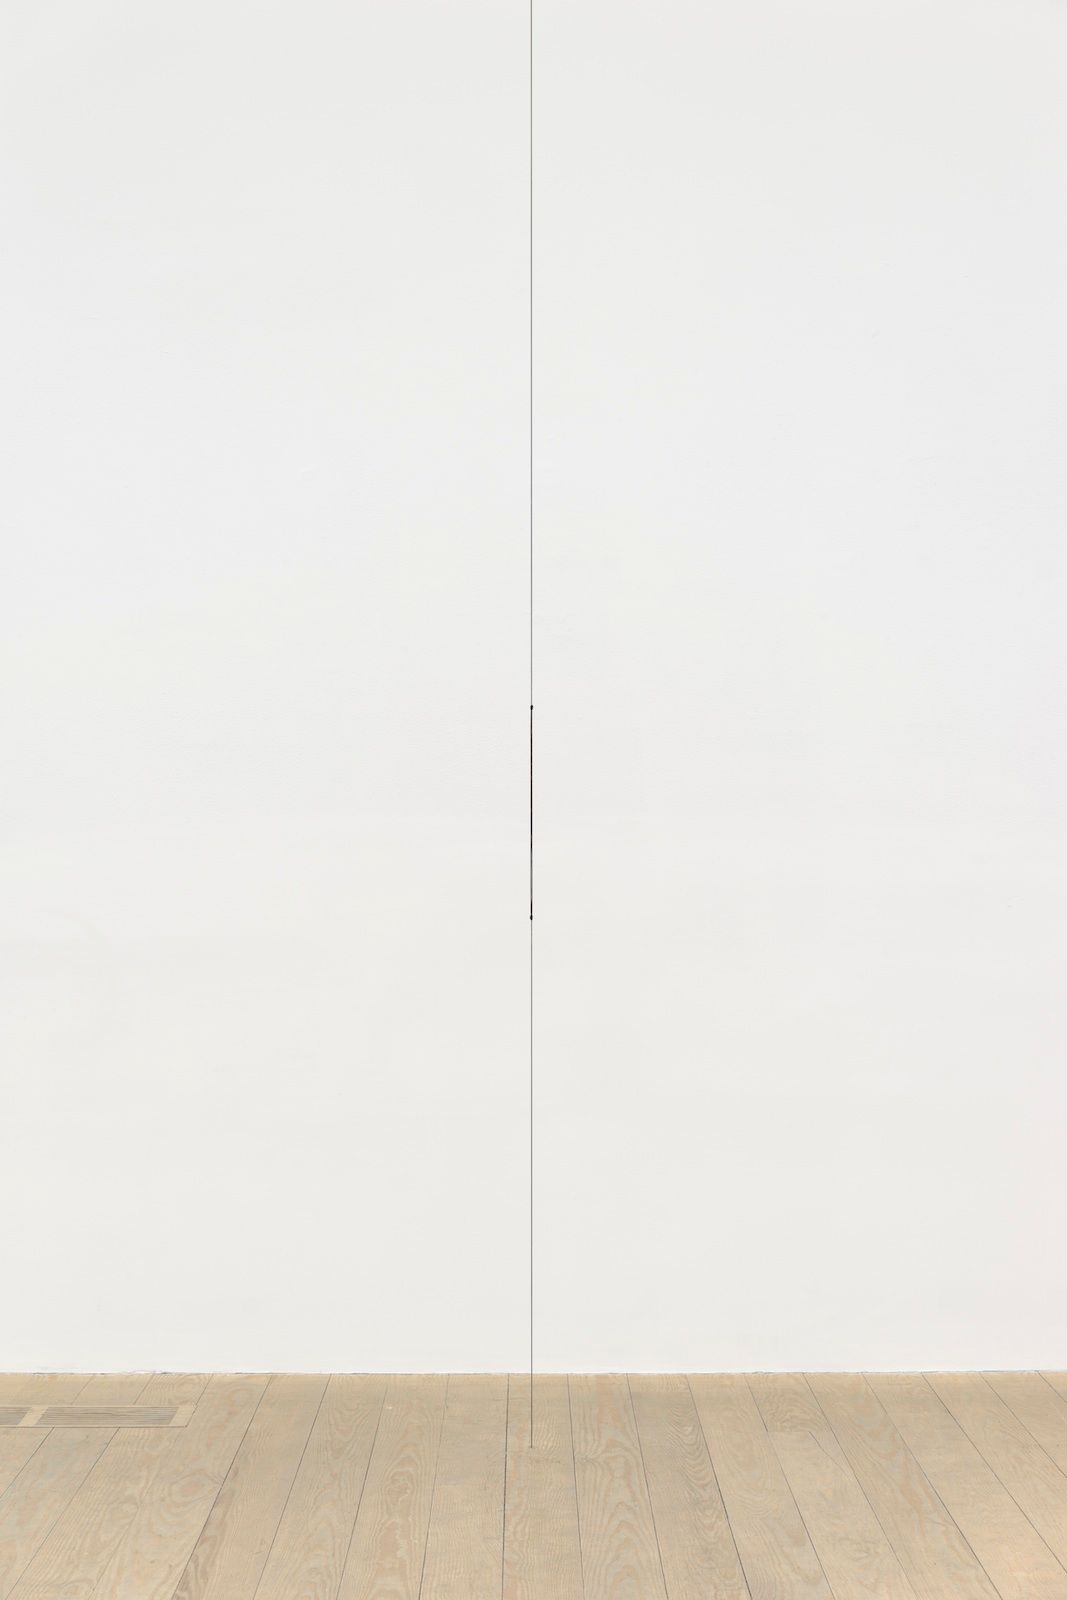 Stephen Lichty, Cord, 2014, silk, dimensions variable